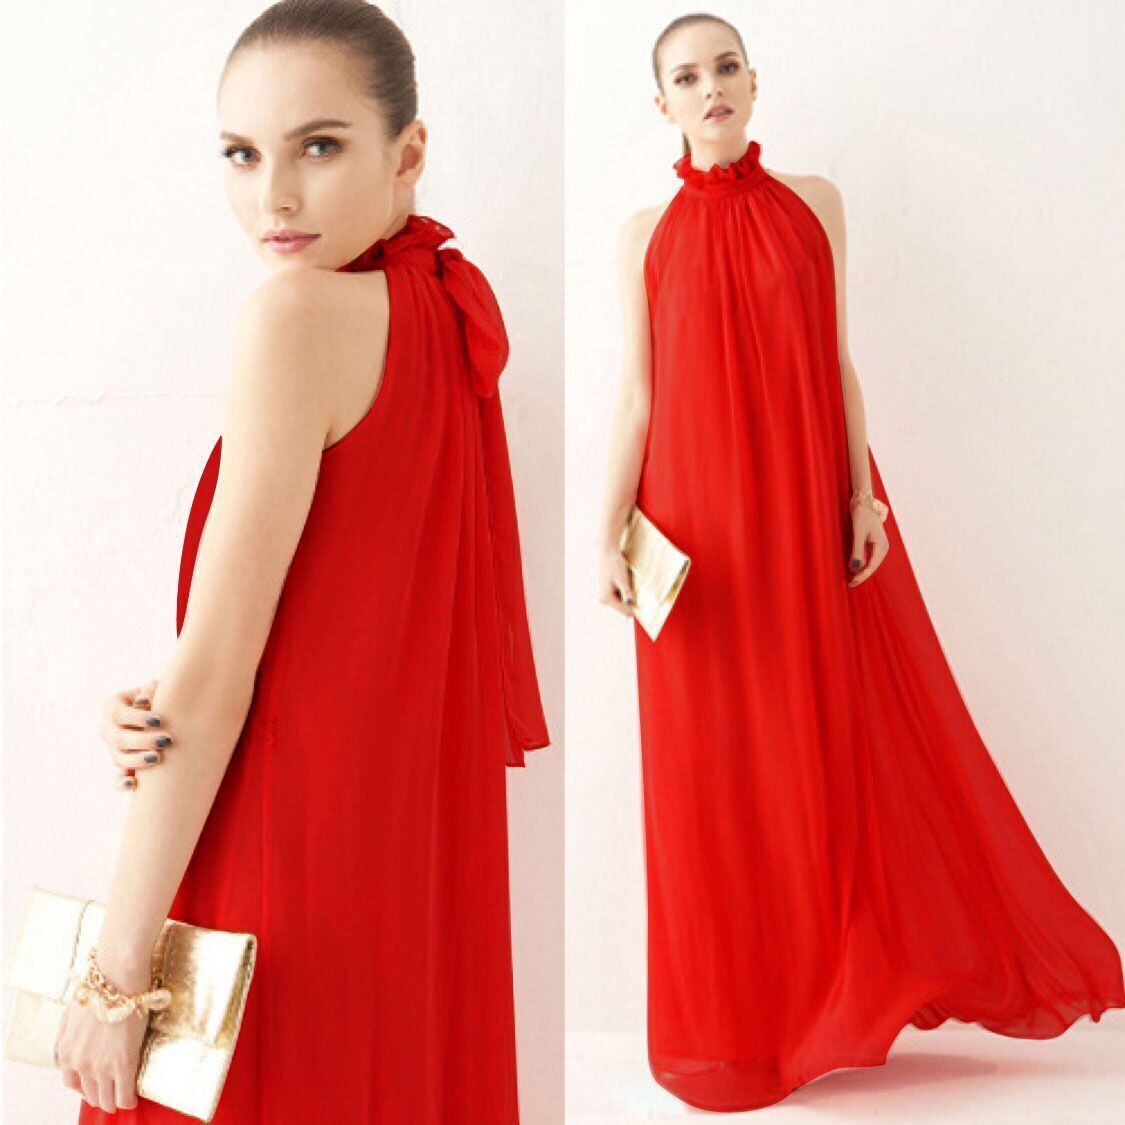 Bare Shoulder Candy Color High Neck Long Pleated Party Beach Dress